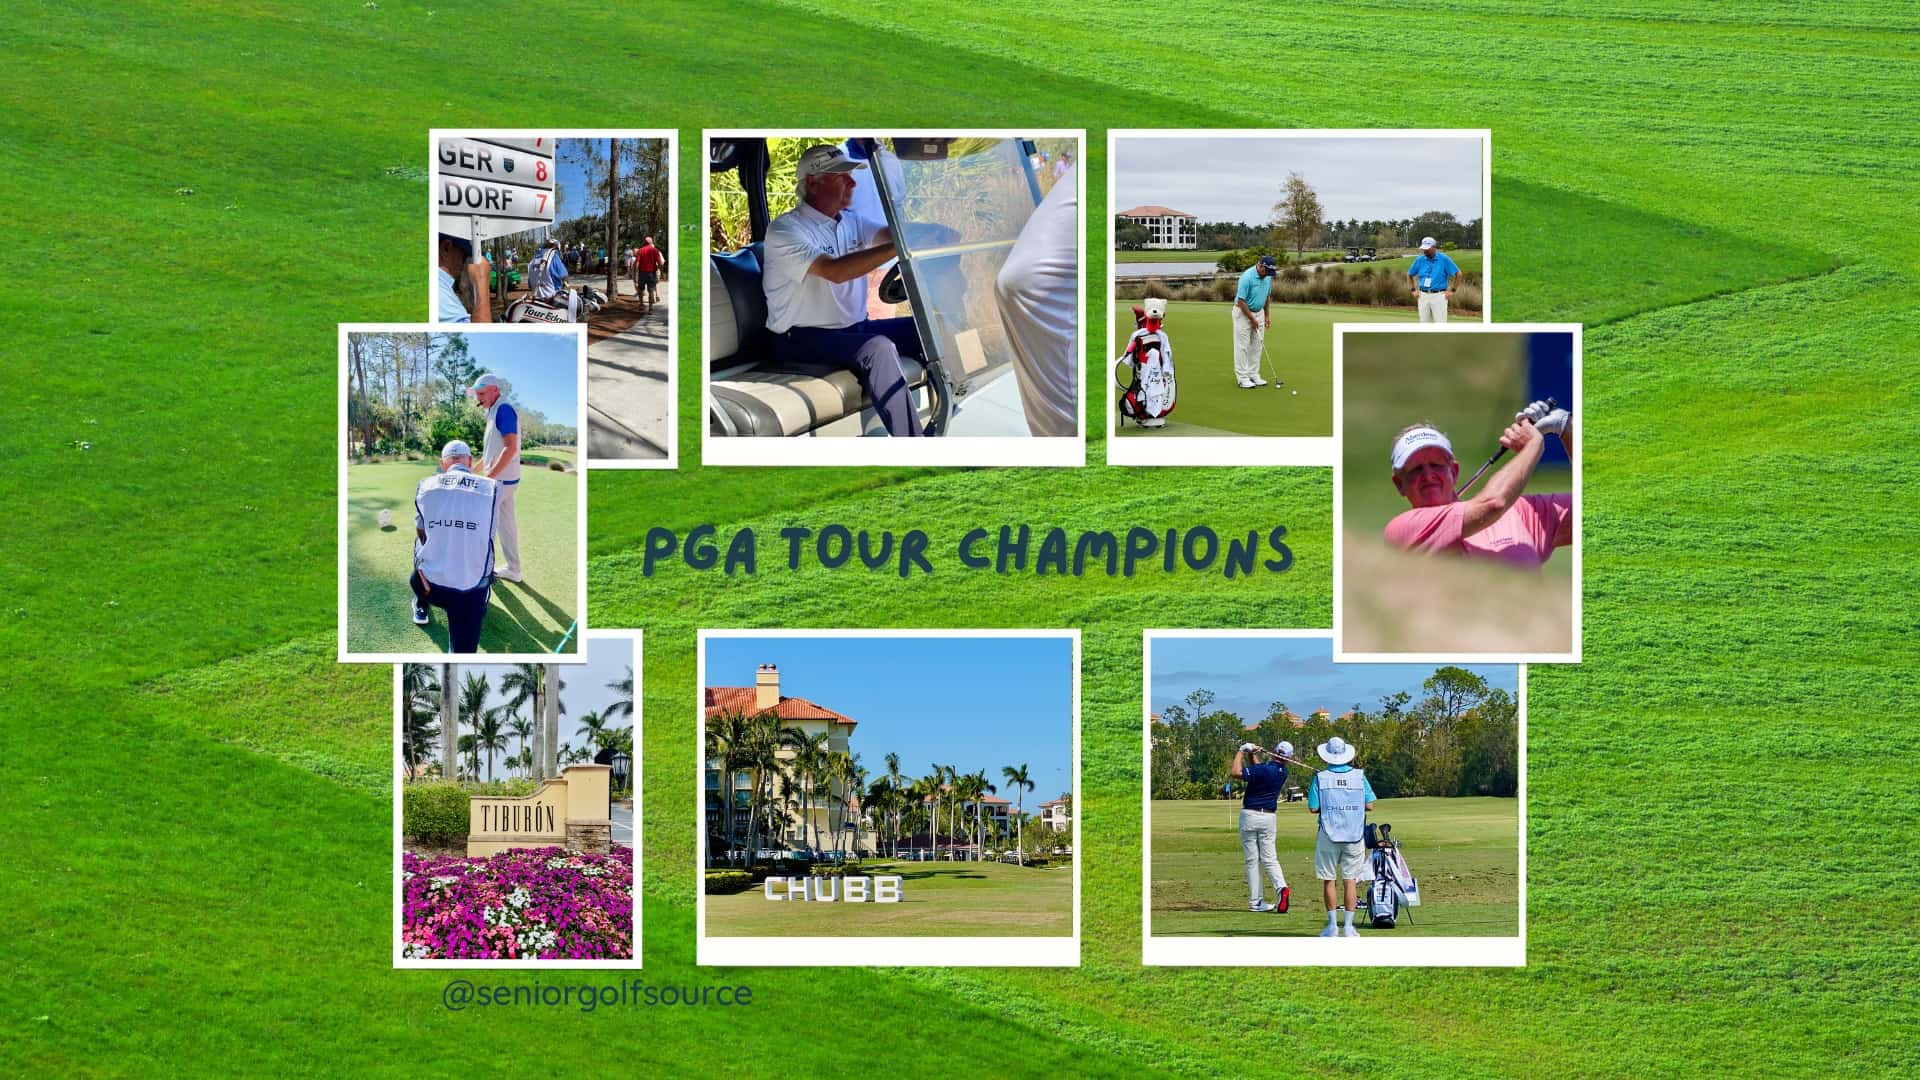 PGA Tour Champions Schedule & Tour Information: Photos of Fred Couples, Ernie Els, and other memories